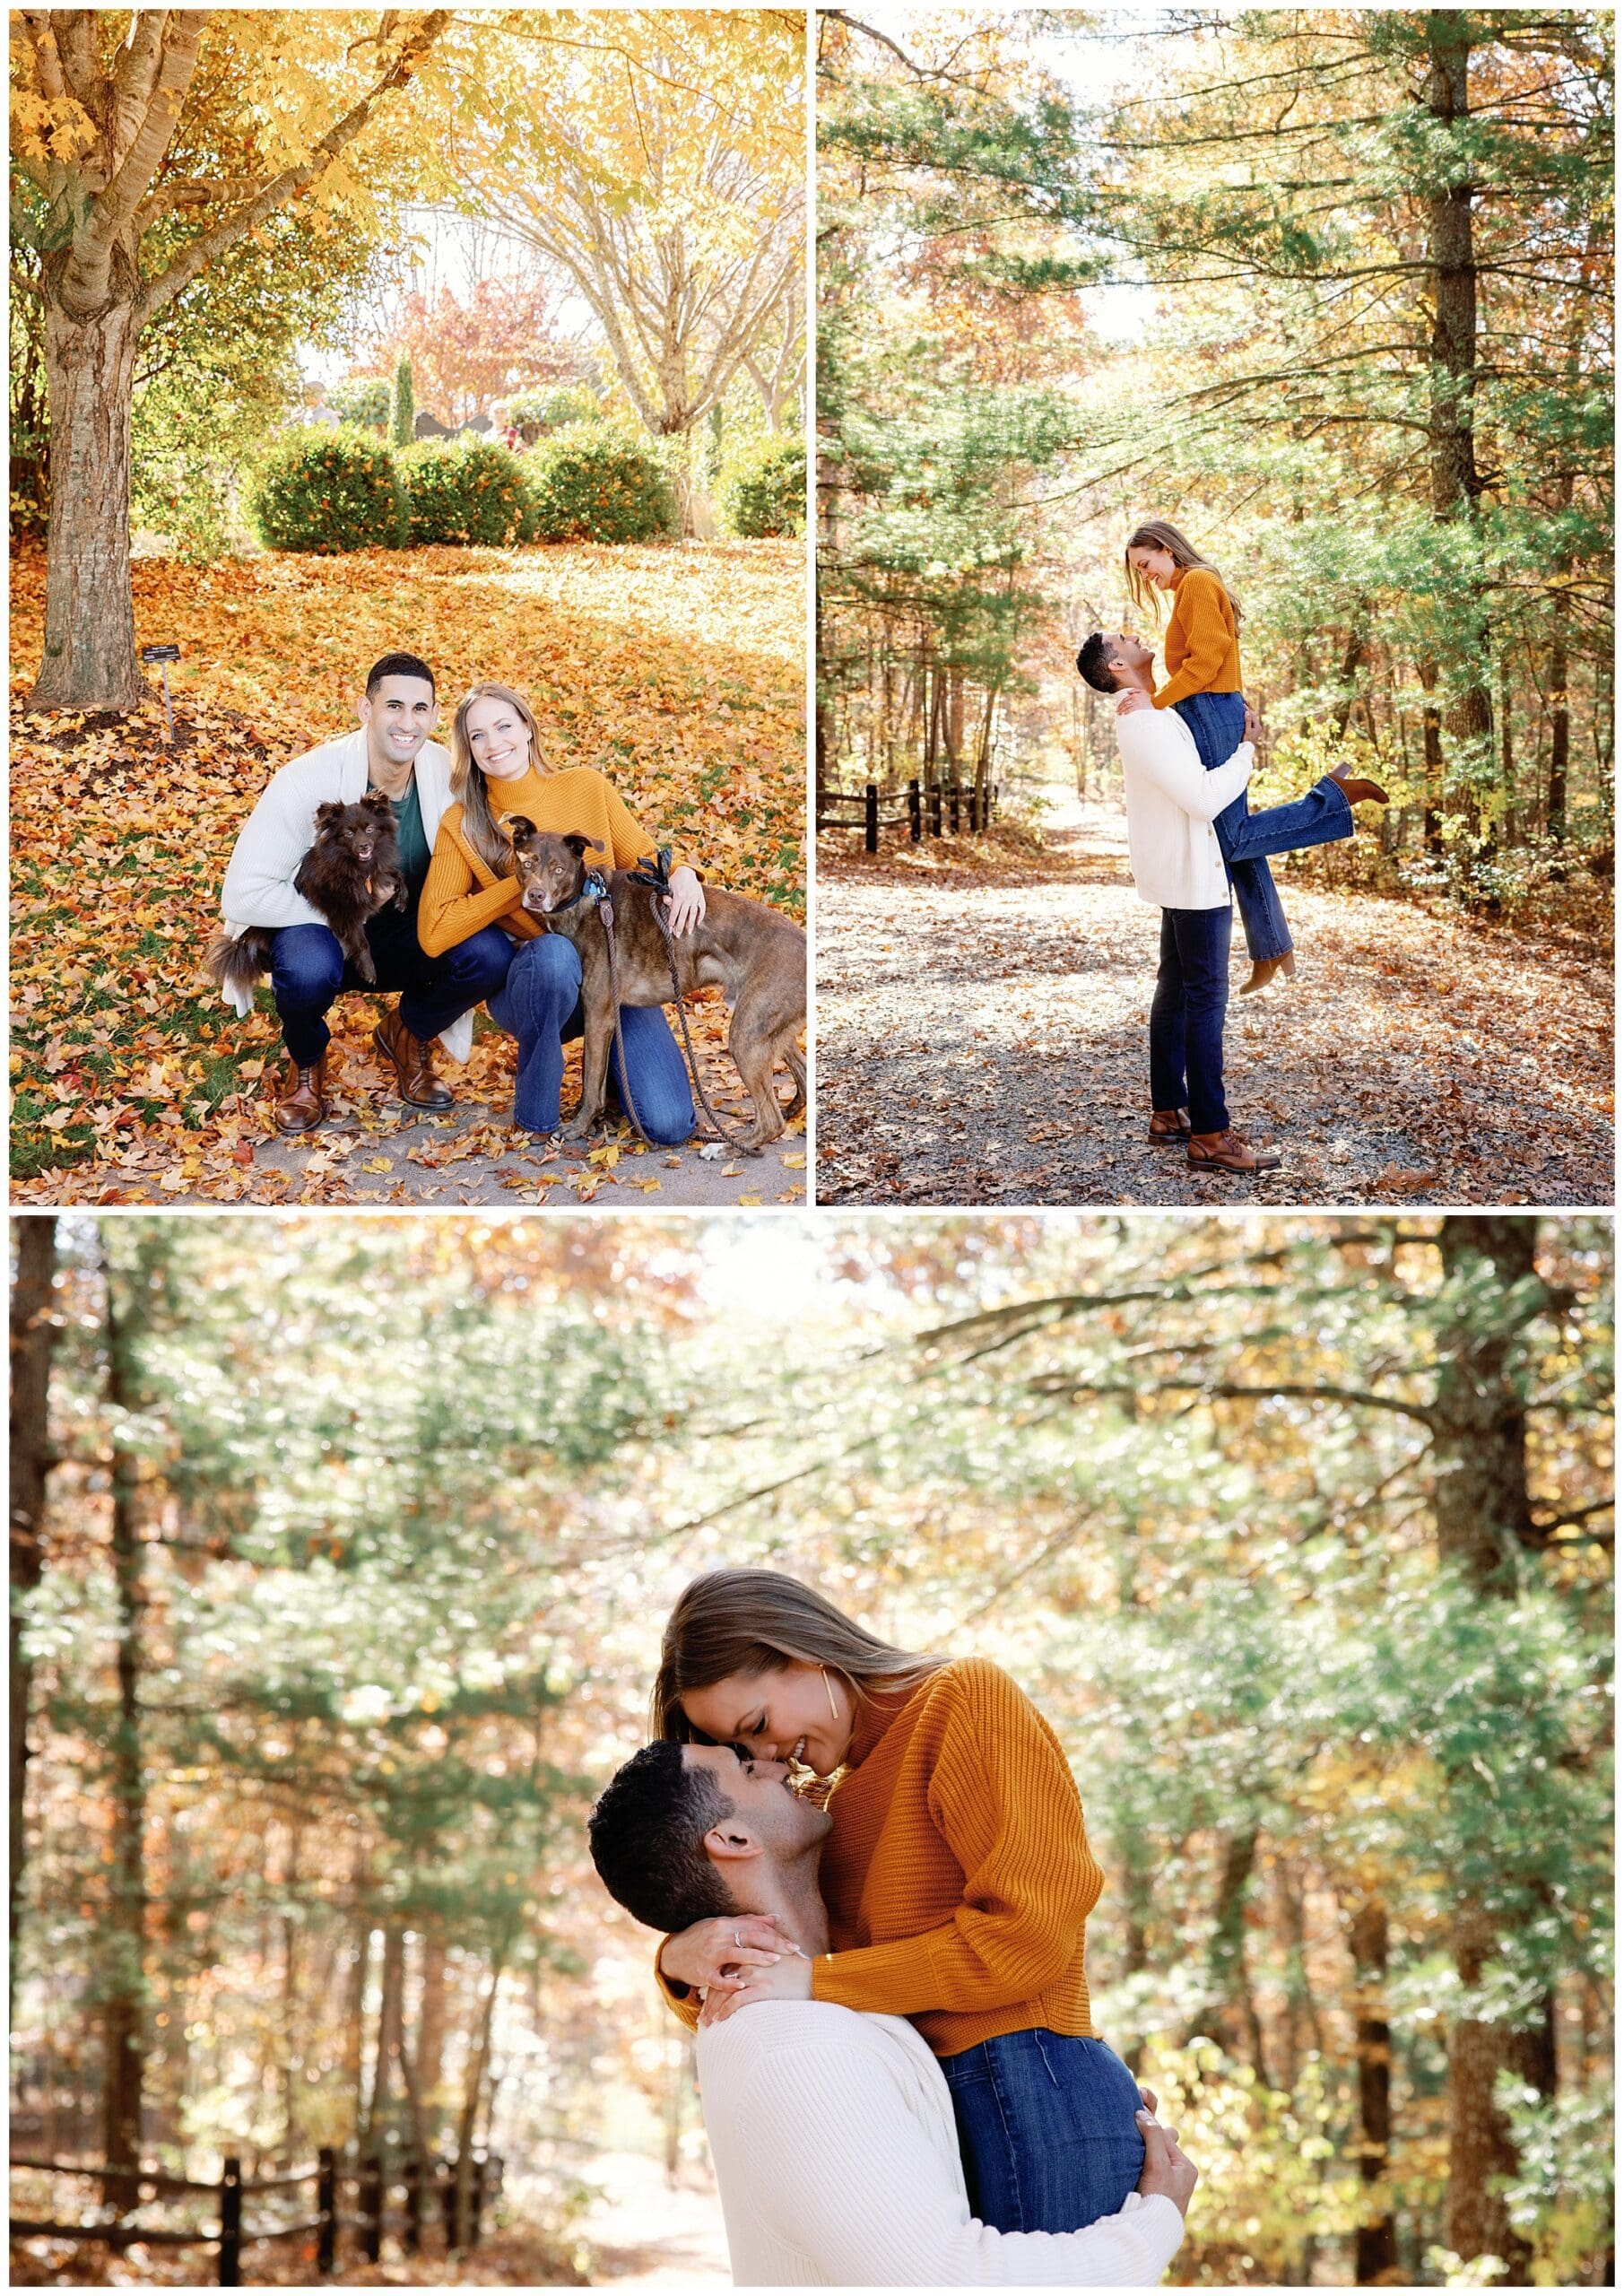 The vibrant fall foliage provides a stunning backdrop as the groom-to-be lifts his bride, showcasing their playful and affectionate connection. The warm autumn colors add a cozy and intimate feel to the shot.